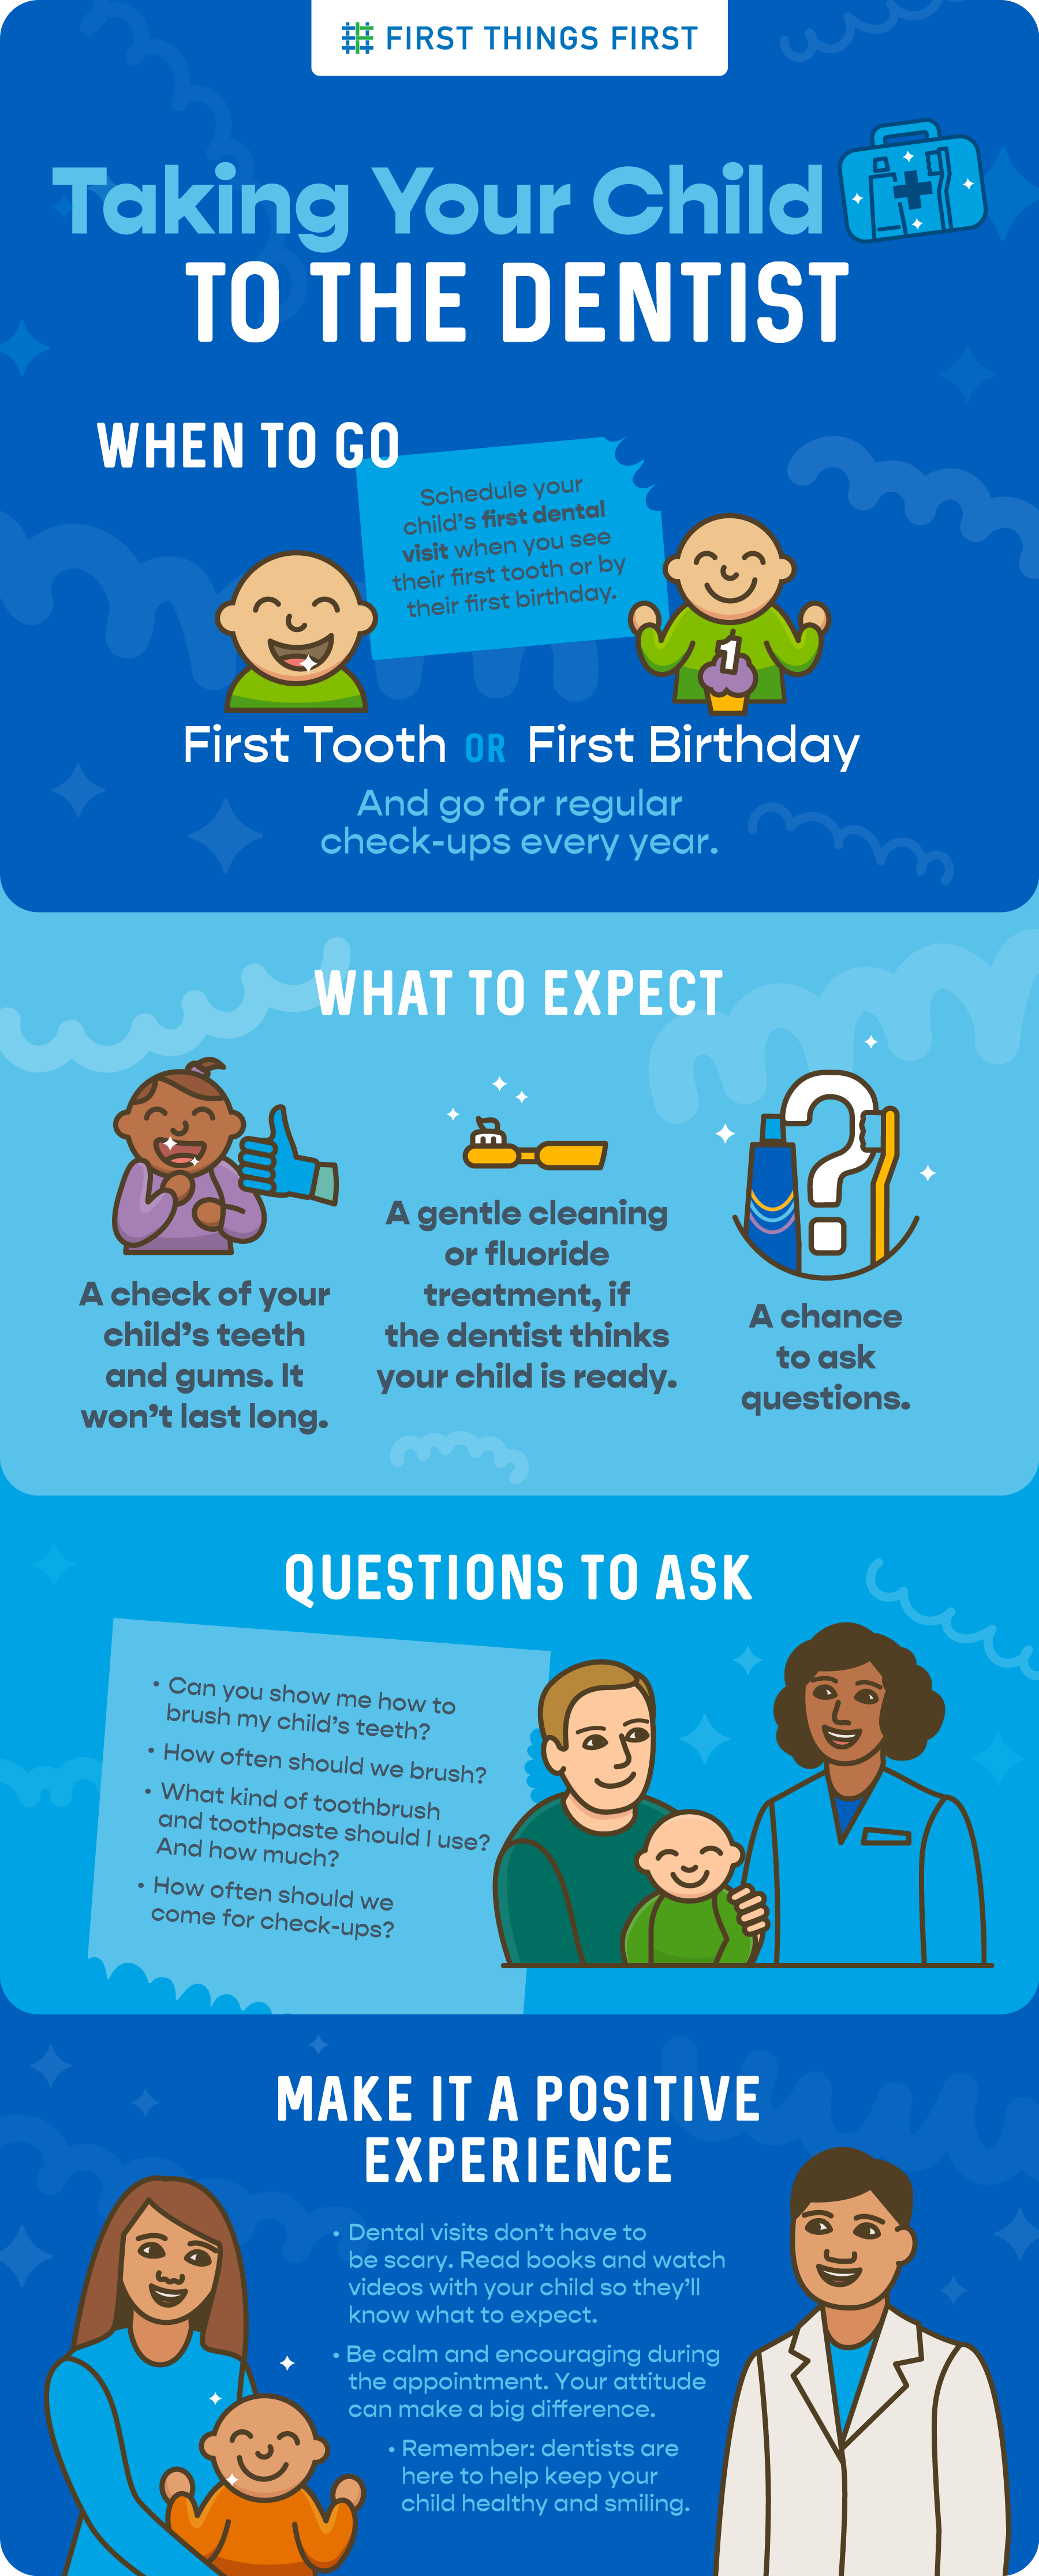 How to Make Your Child’s First Dental Visit a Positive Experience